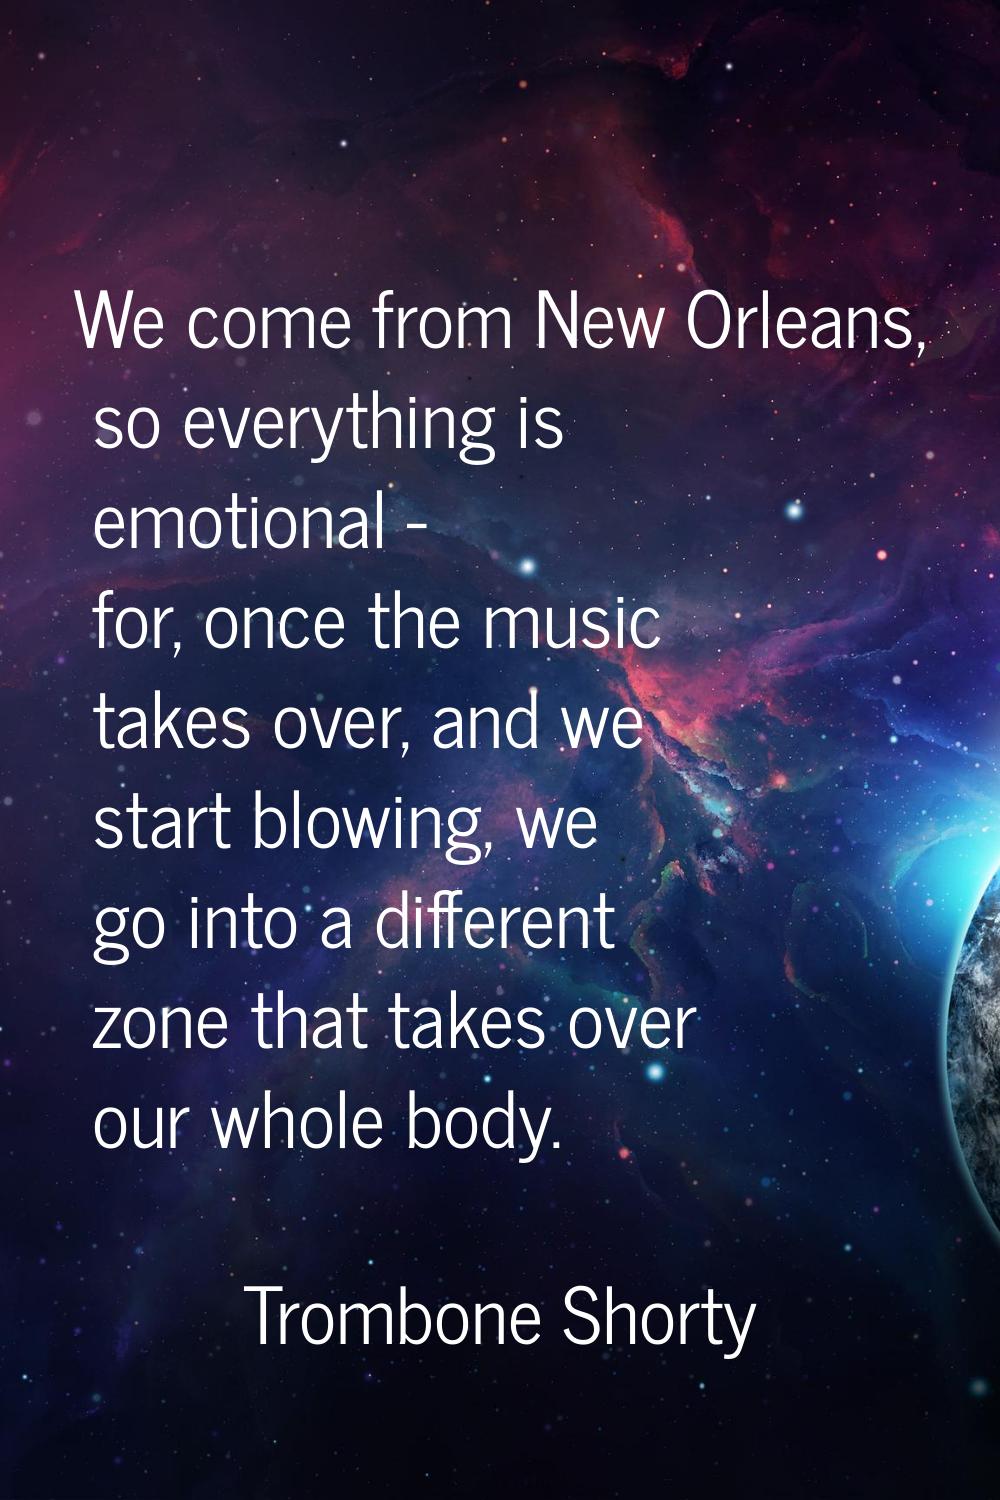 We come from New Orleans, so everything is emotional - for, once the music takes over, and we start